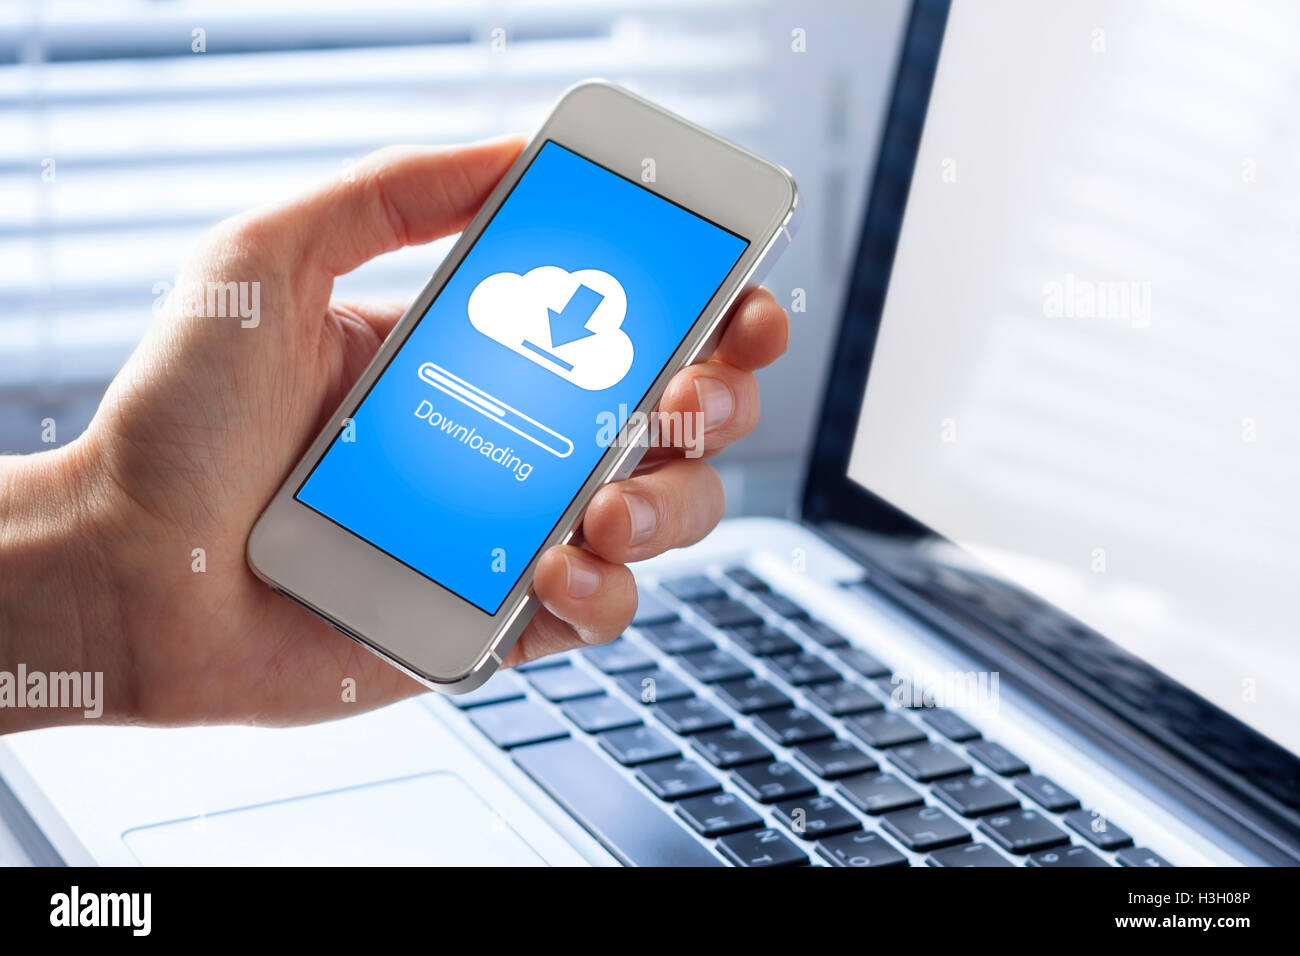 Cloud downloading on mobile phone Stock Photo